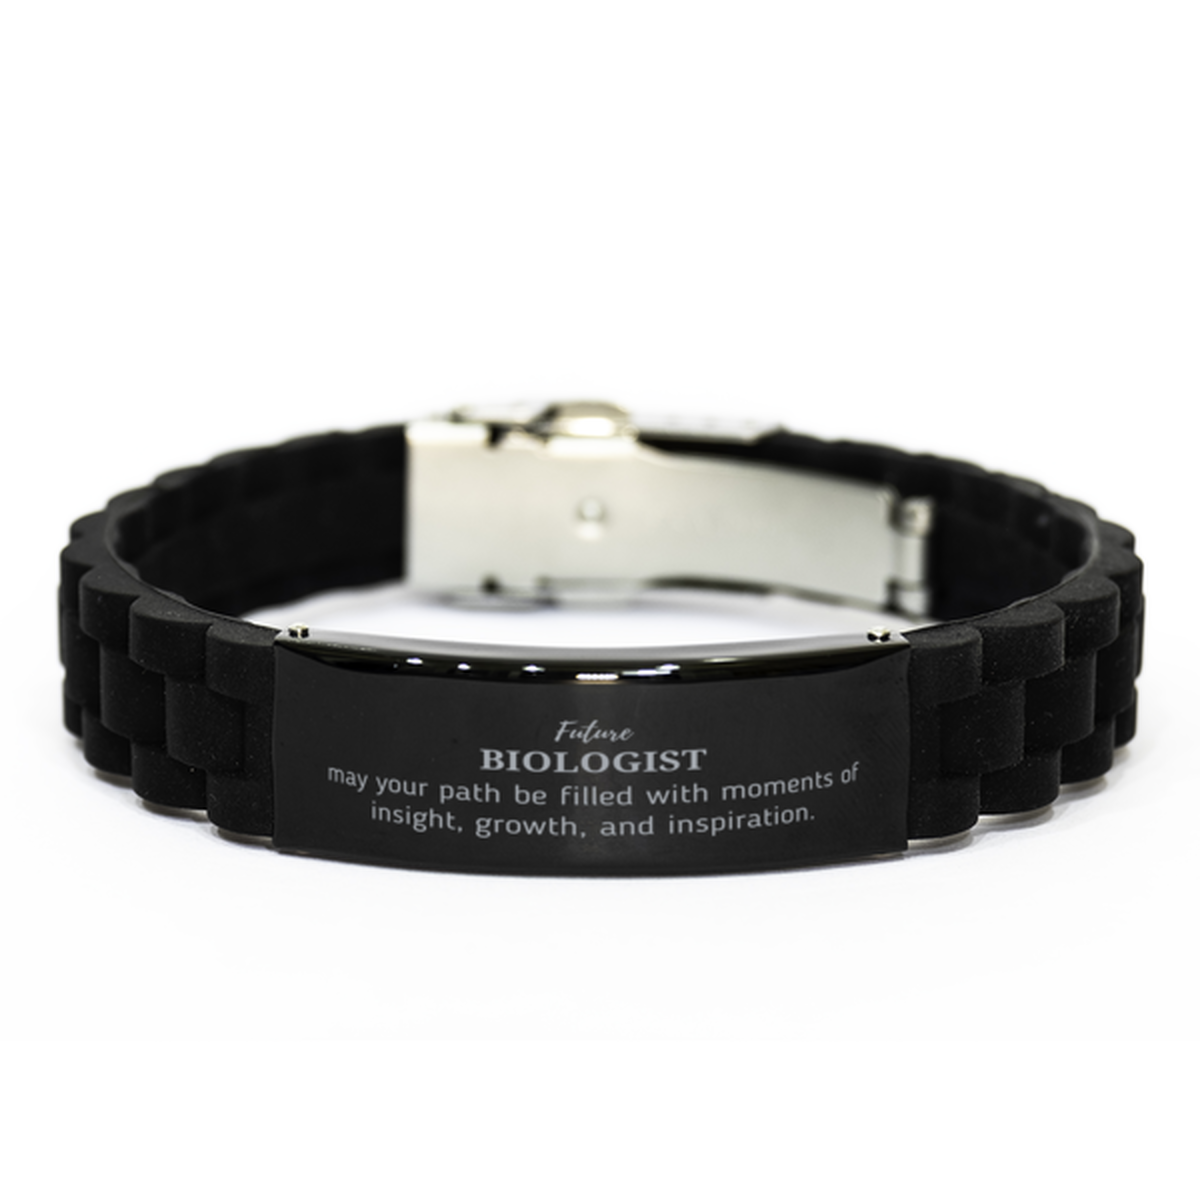 Future Biologist Gifts, May your path be filled with moments of insight, Graduation Gifts for New Biologist, Christmas Unique Black Glidelock Clasp Bracelet For Men, Women, Friends